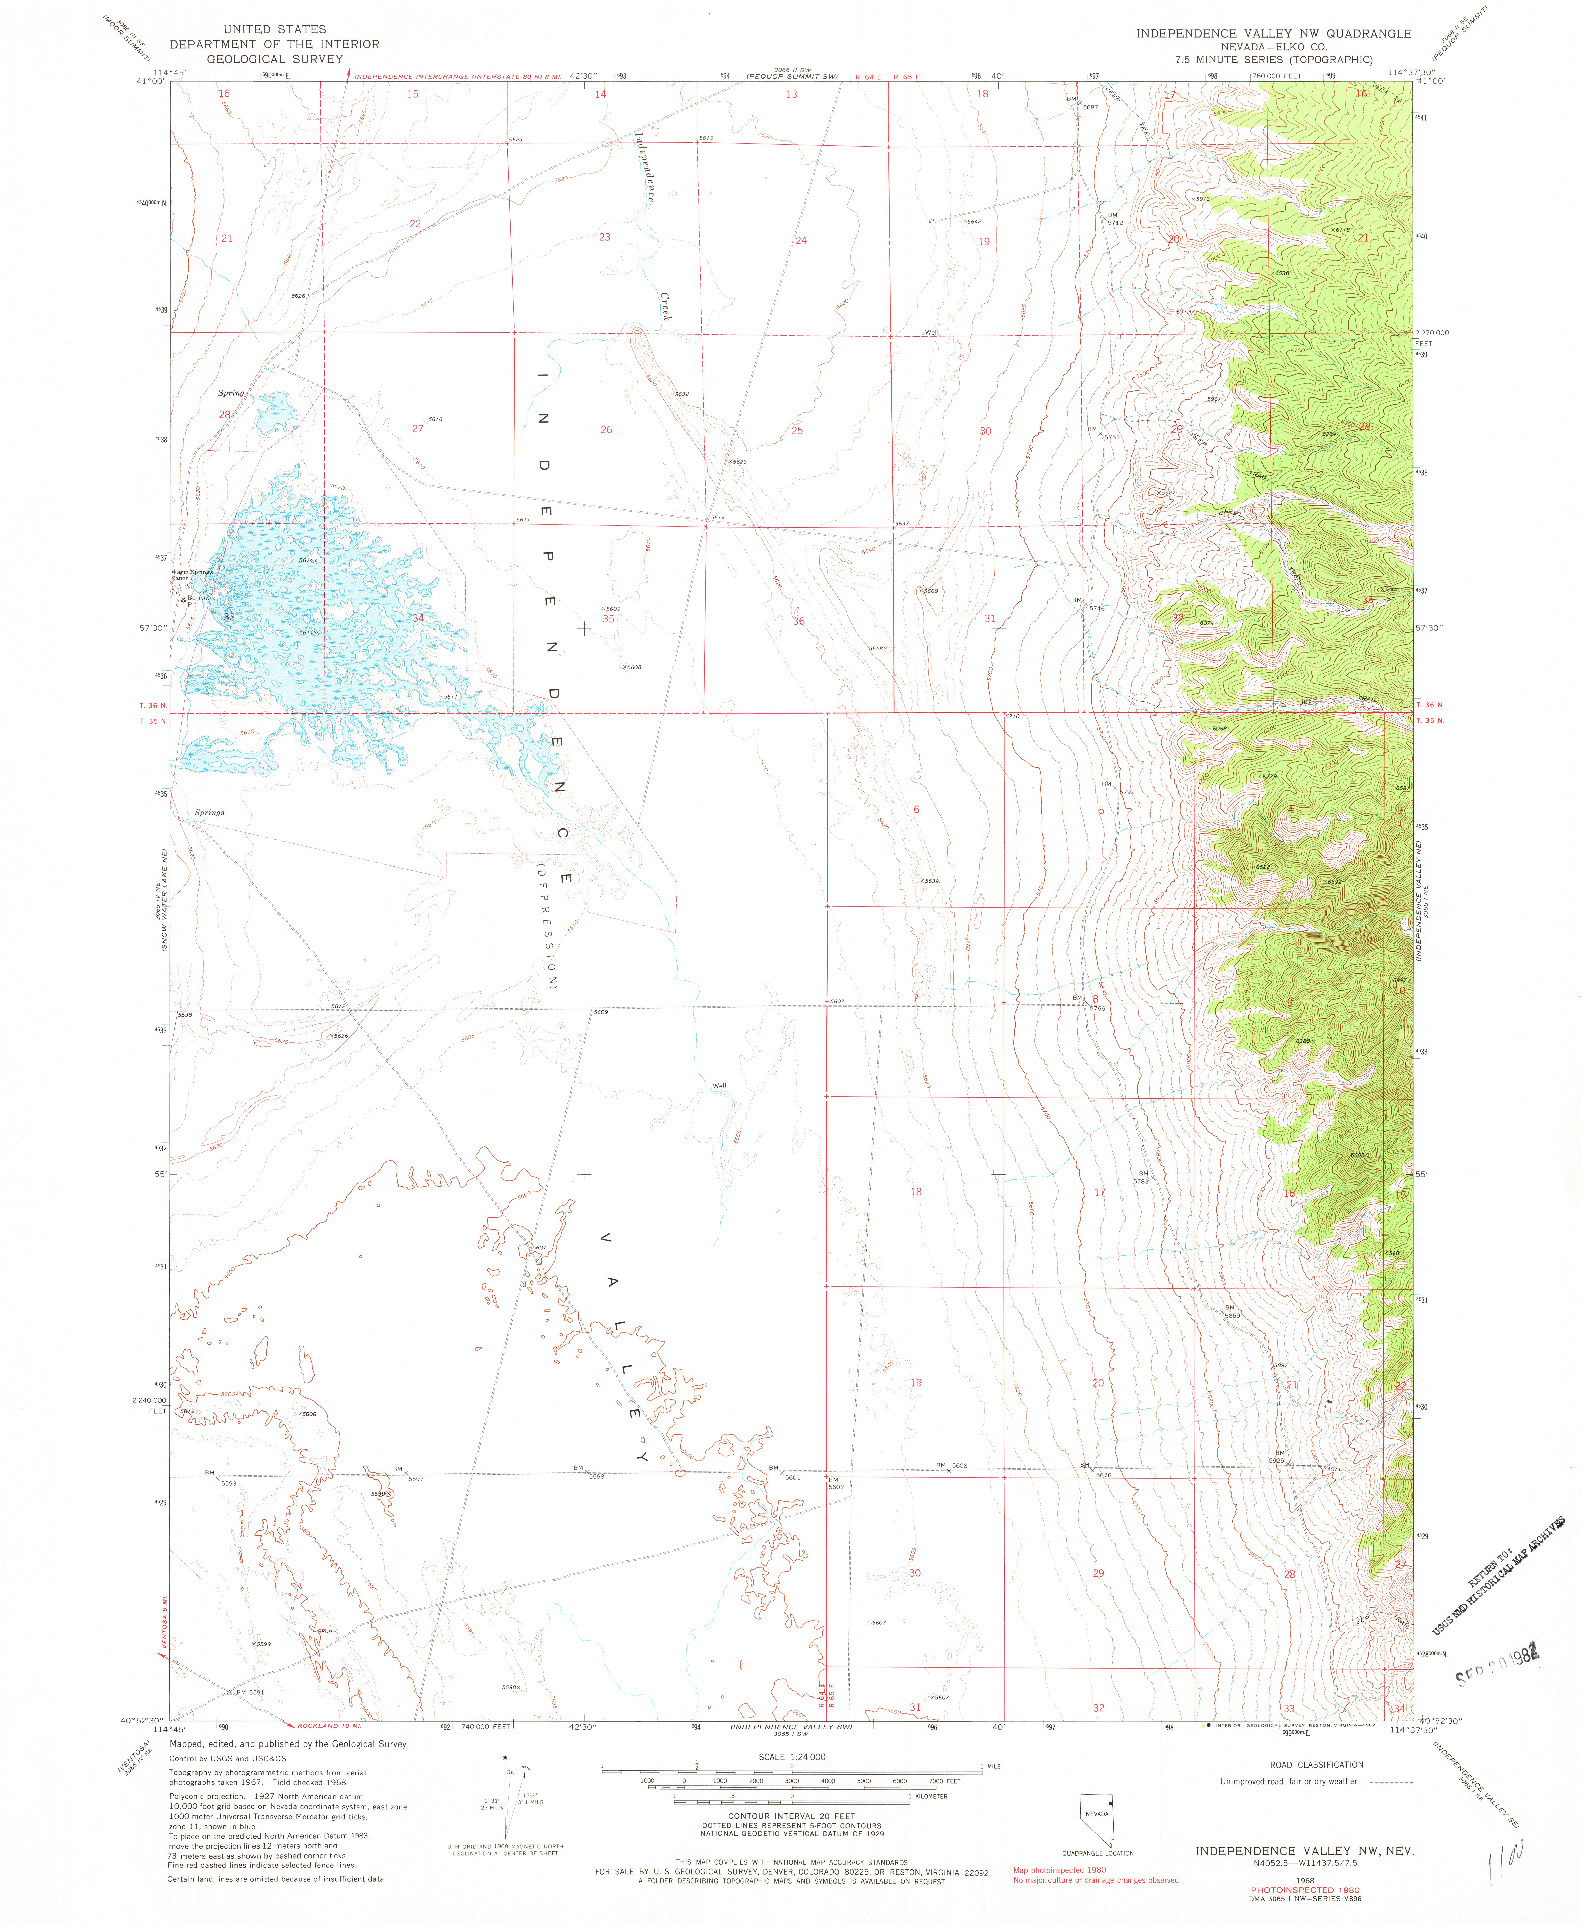 USGS 1:24000-SCALE QUADRANGLE FOR INDEPENDENCE VALLEY NW, NV 1968